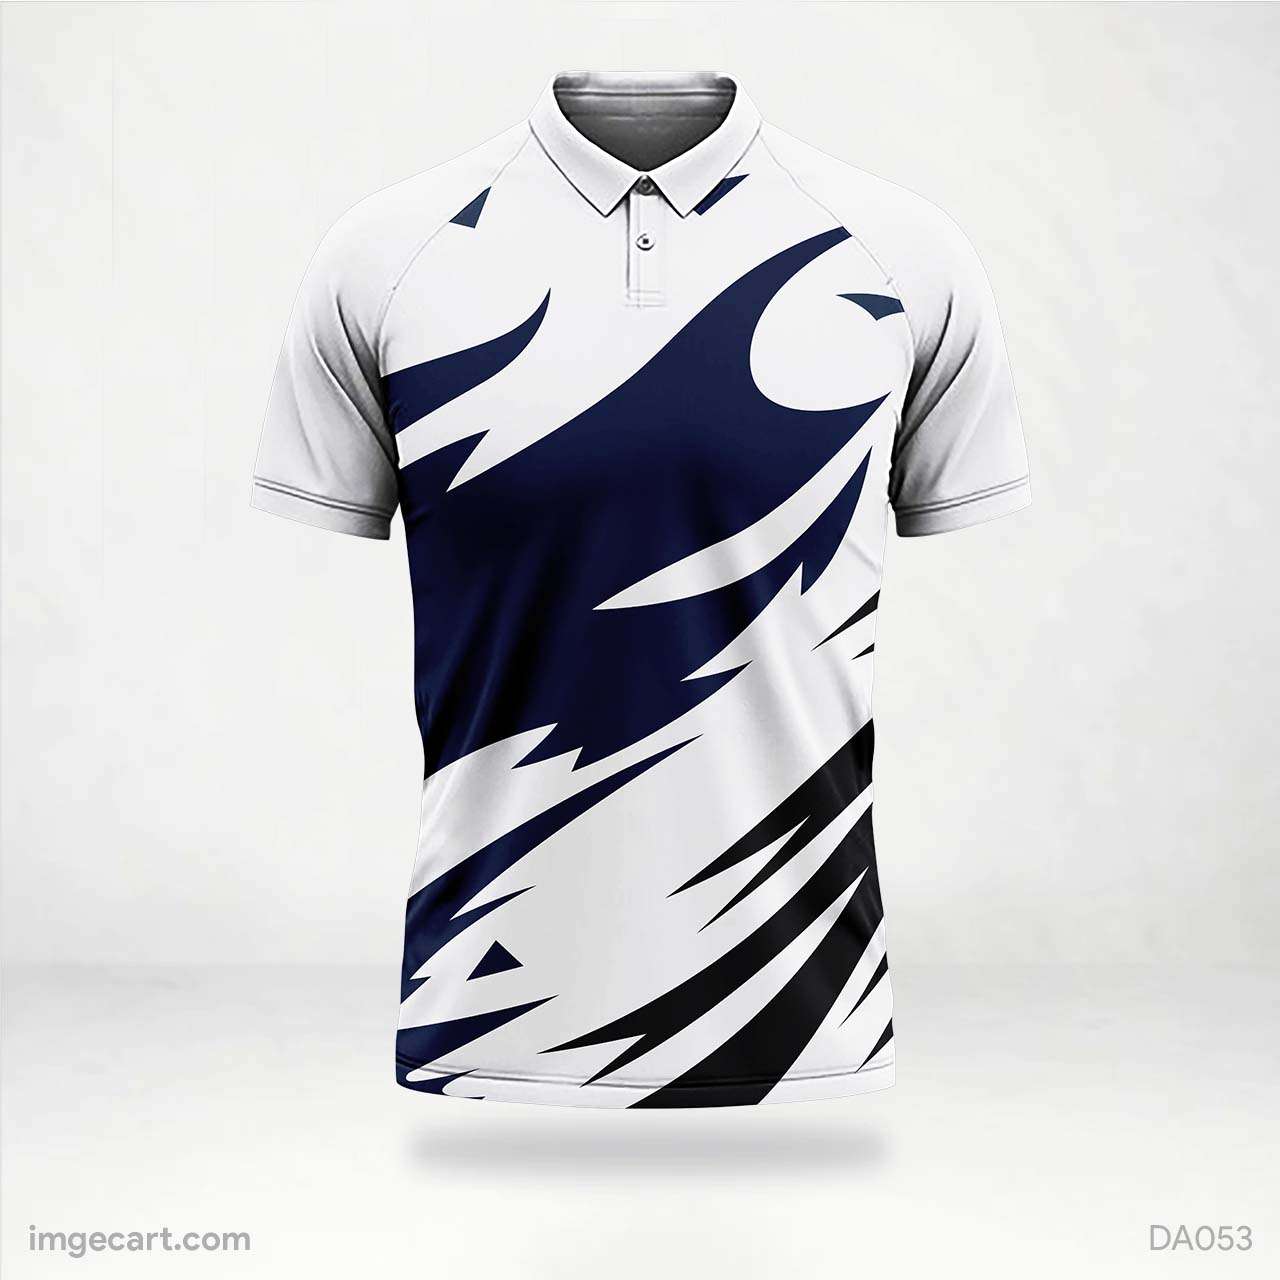 Cricket Jersey Design Blue with Red Pattern - imgecart